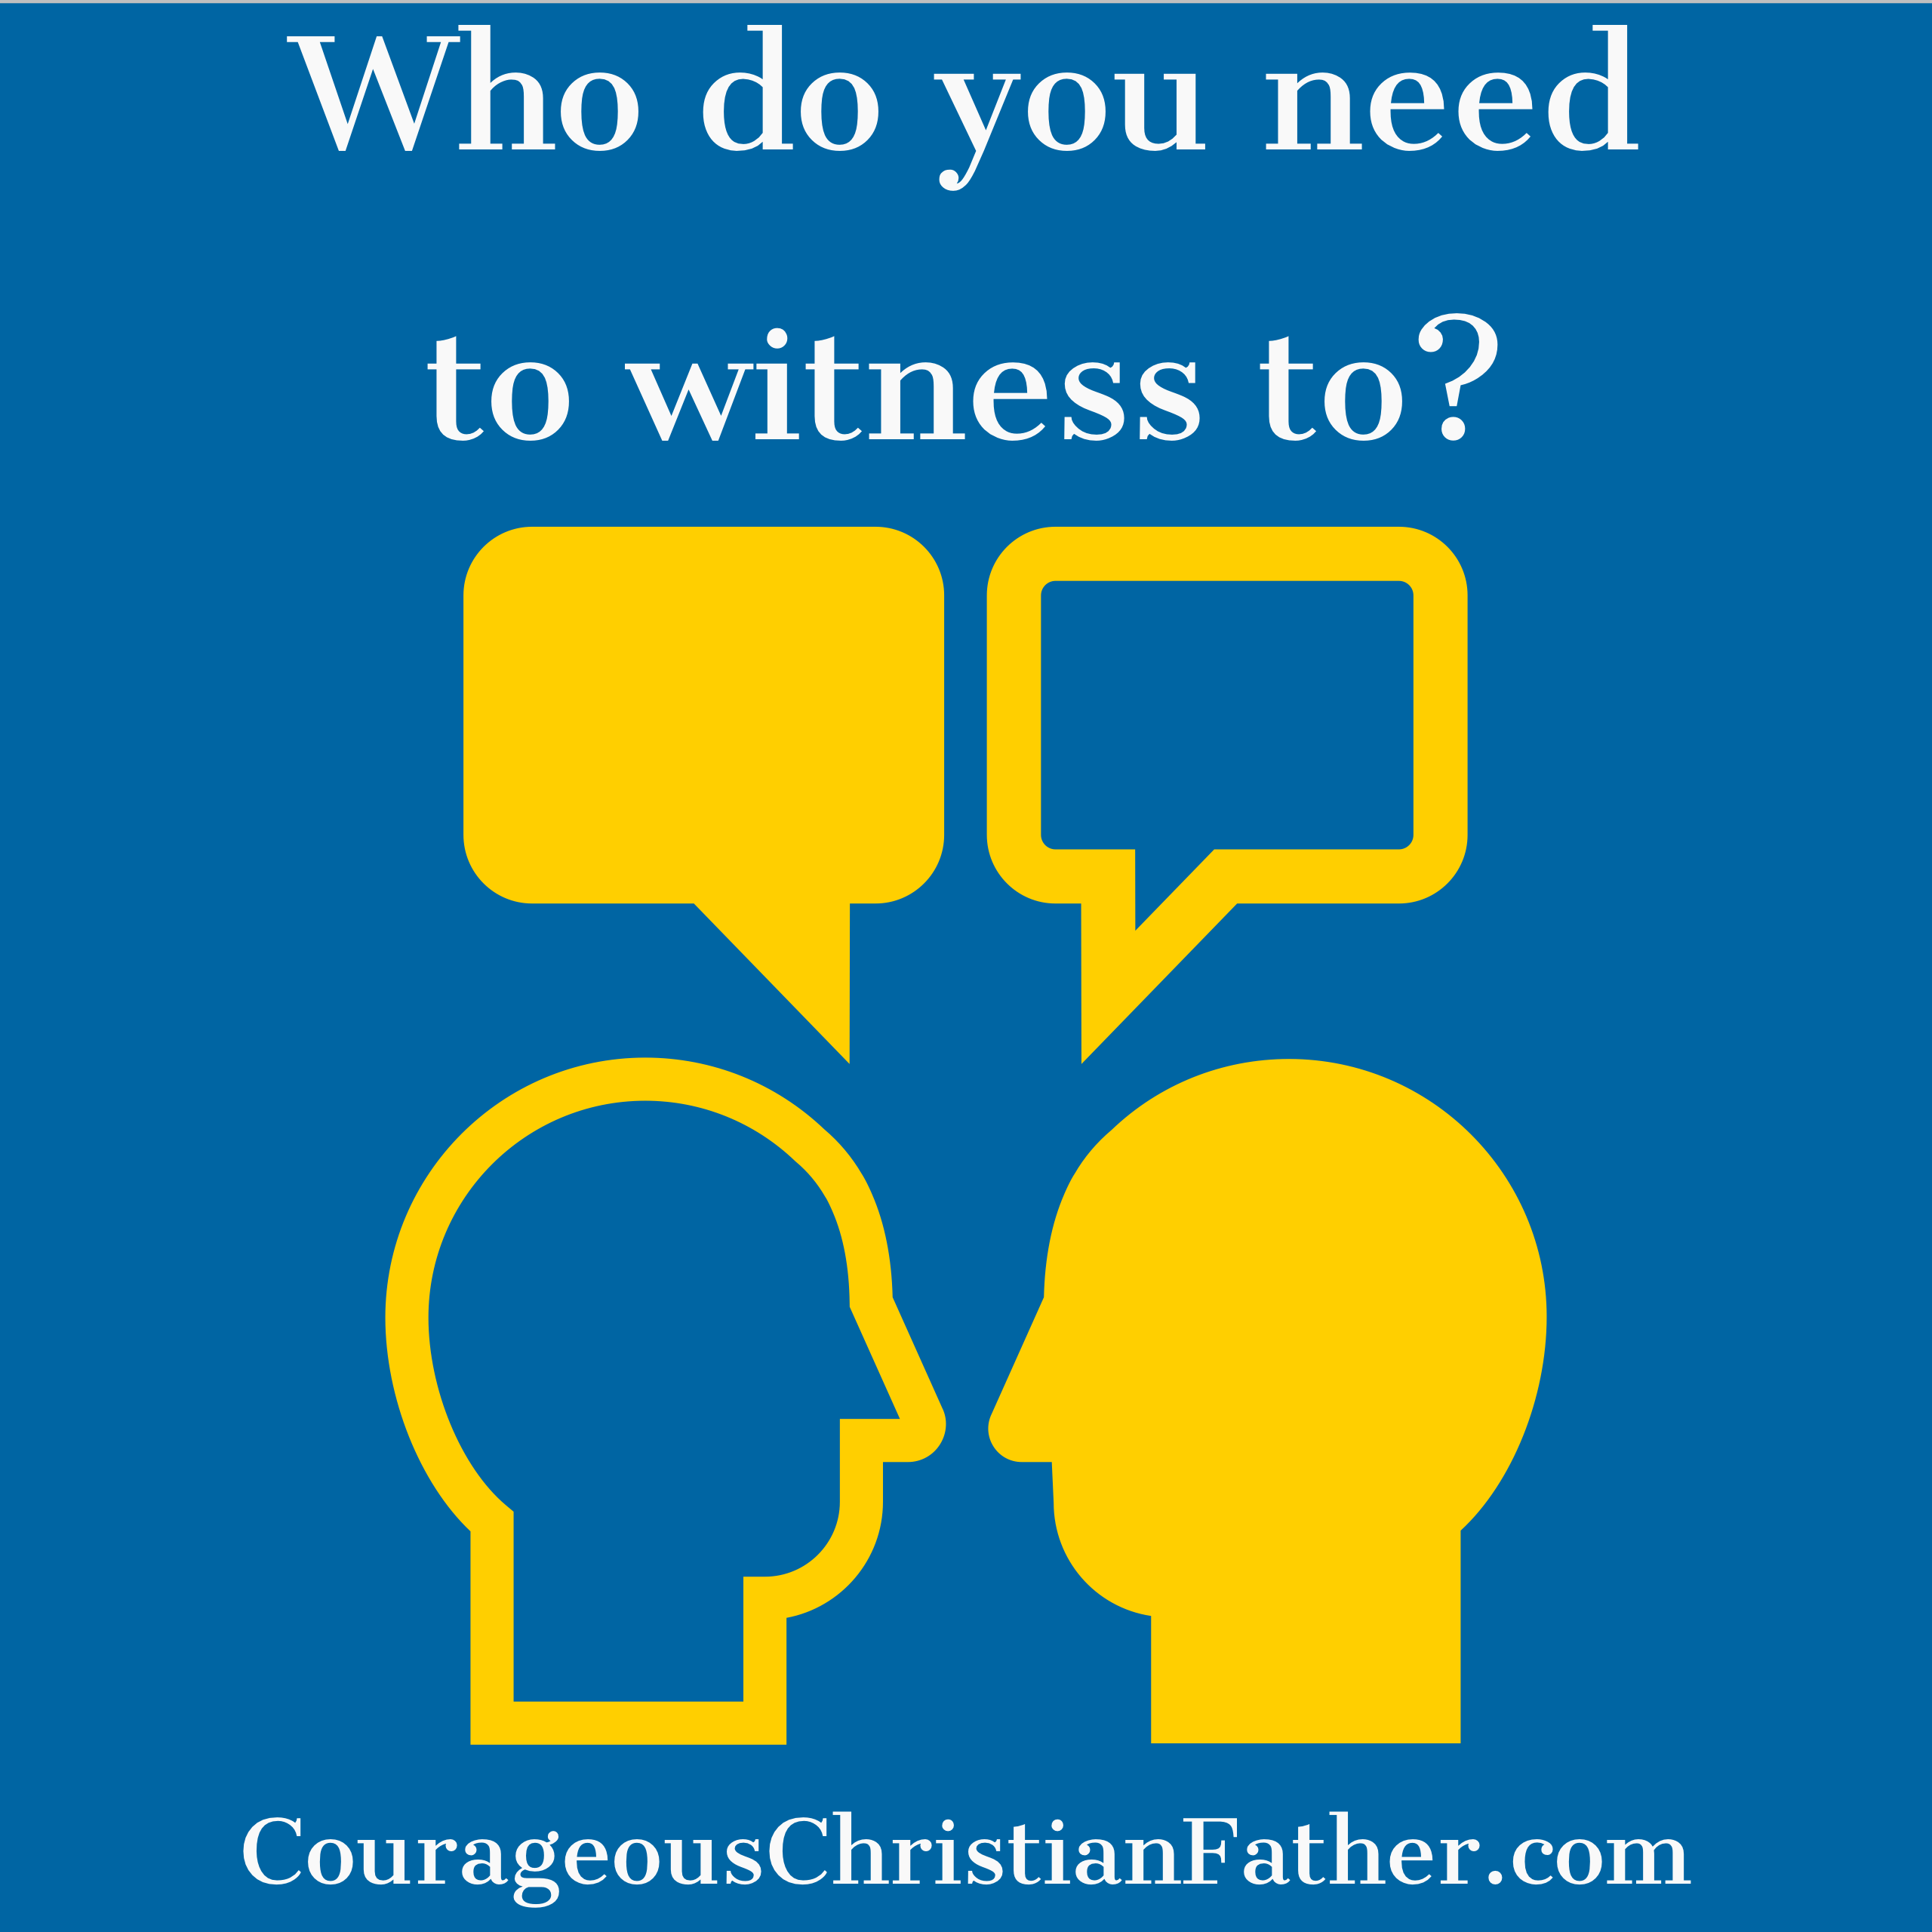 Who do you need to witness to? Simple answer is … EVERYONE! 